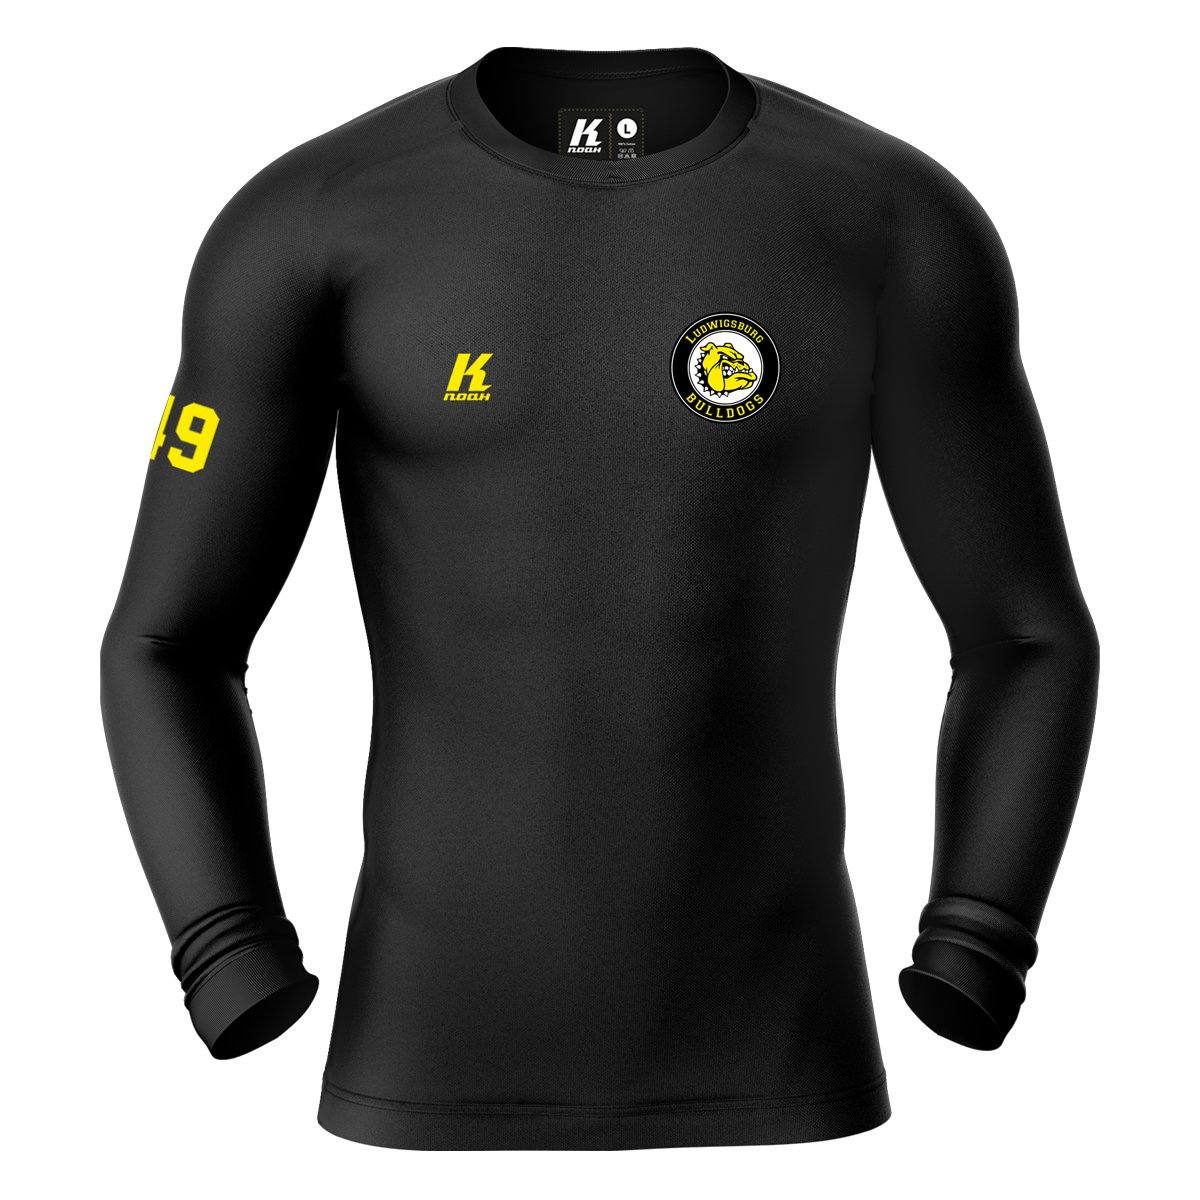 LB-Bulldogs K.Tech Compression Longsleeve Shirt black with Playernumber/Initials